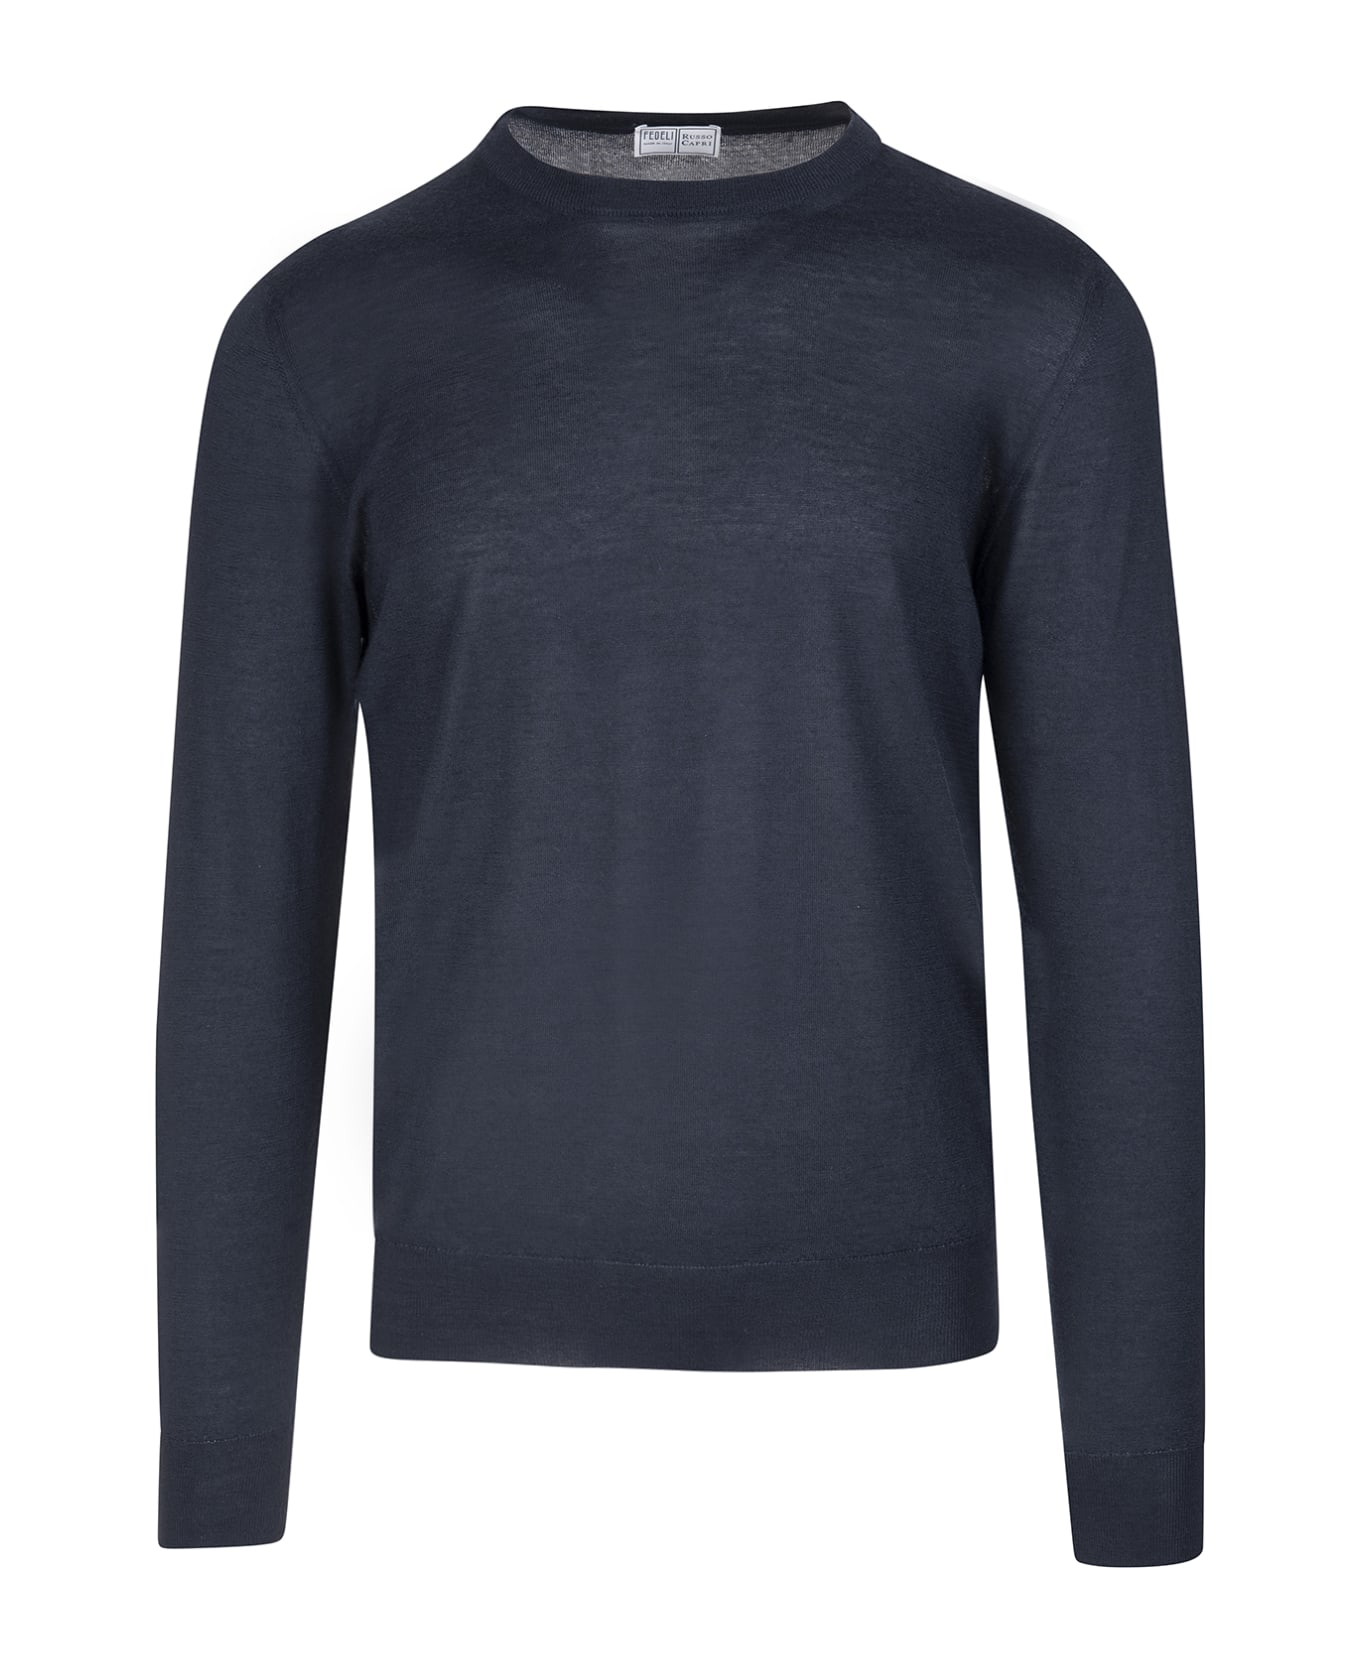 Fedeli Anthracite Round Neck Pullover In Cashmere And Silk - Grey